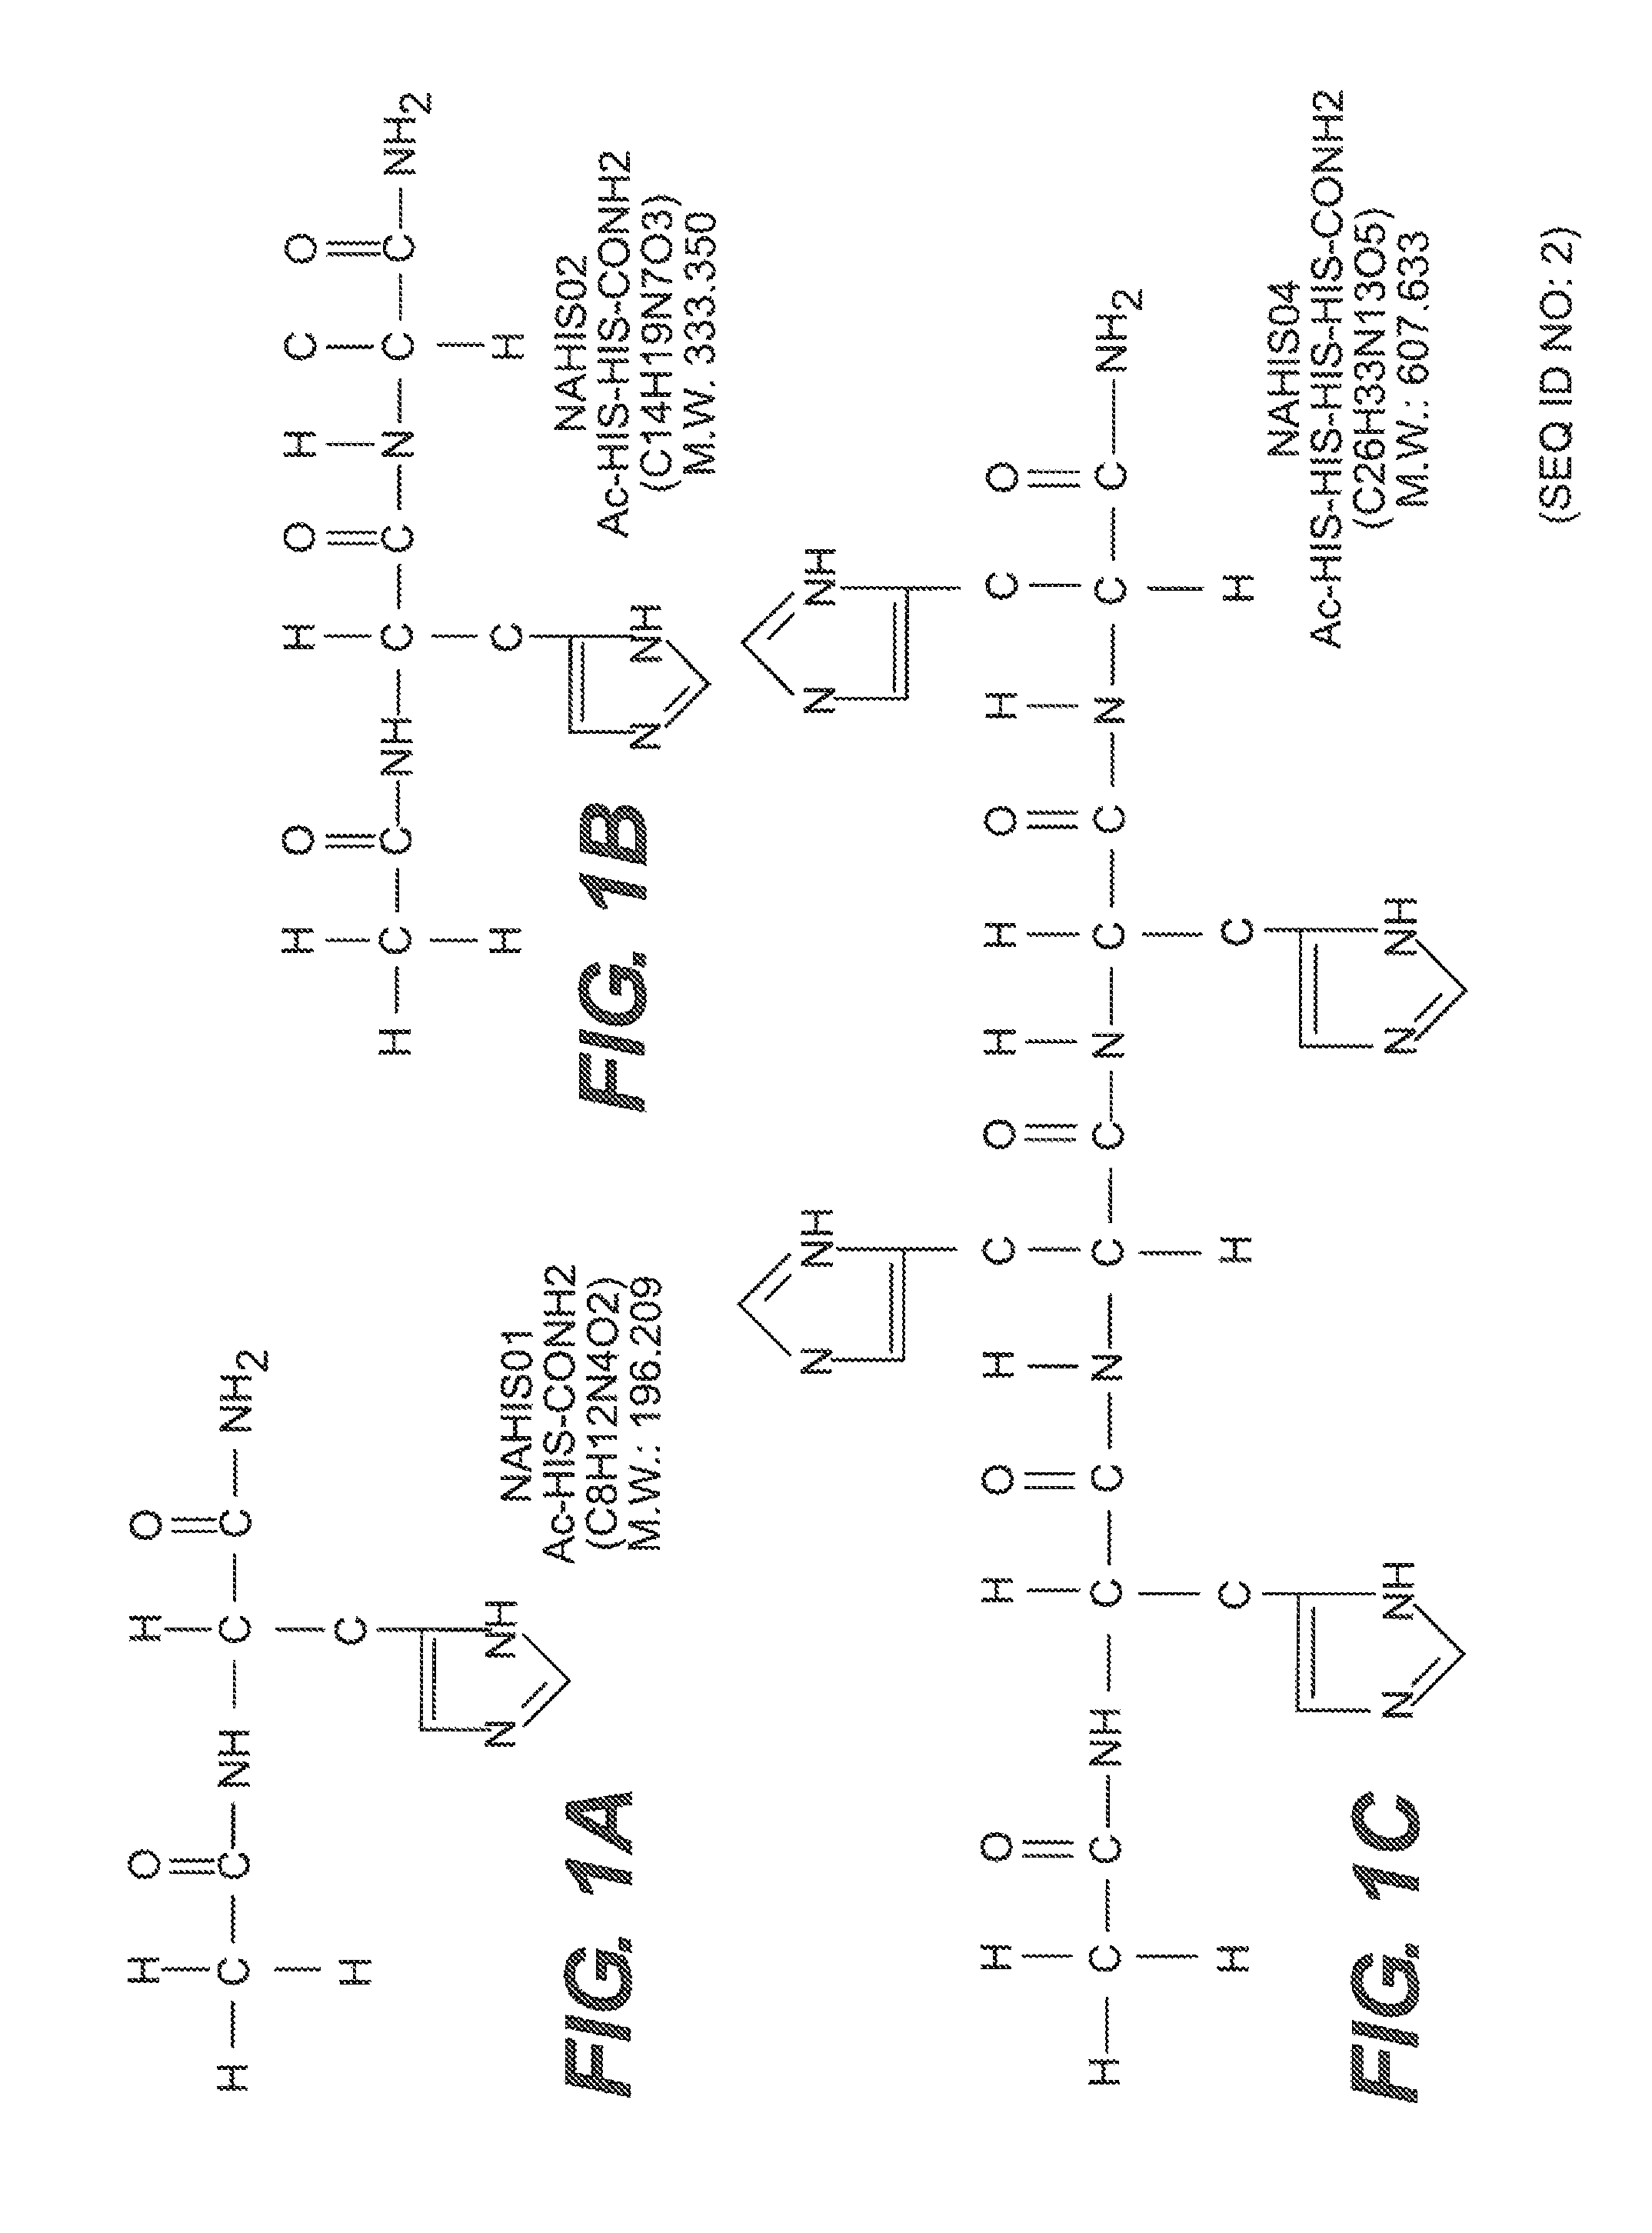 Histidine related compounds for identifying and blocking amyloid beta ion channels